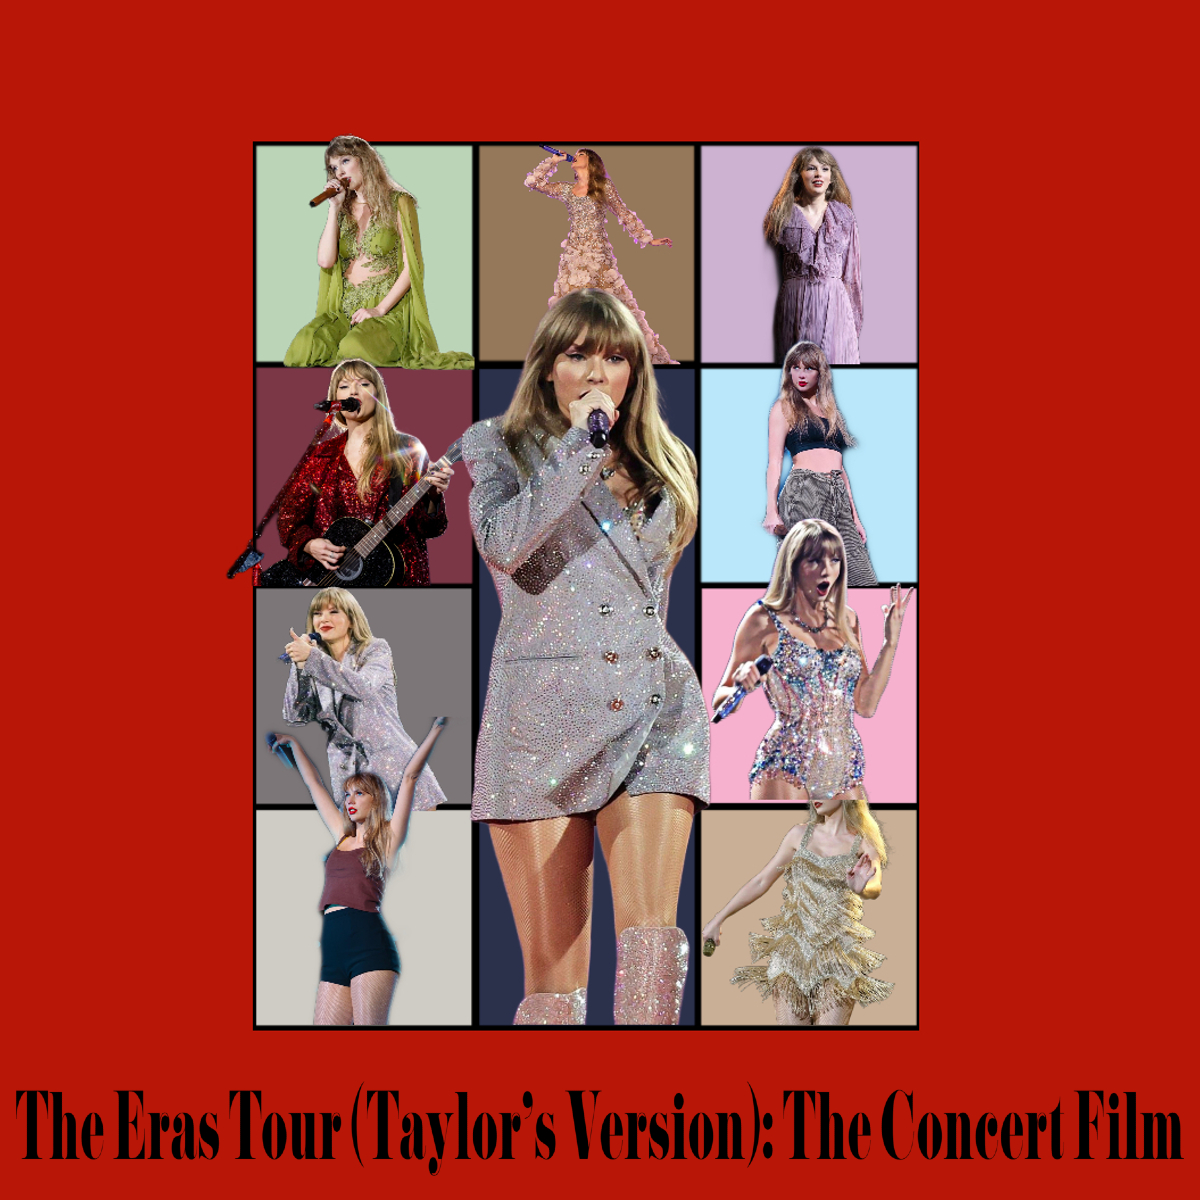 https://static.wikia.nocookie.net/taylor-swift-fanon/images/6/60/TheErasTourTaylorsVersionTheConcertFilm.jpg/revision/latest?cb=20230519000439